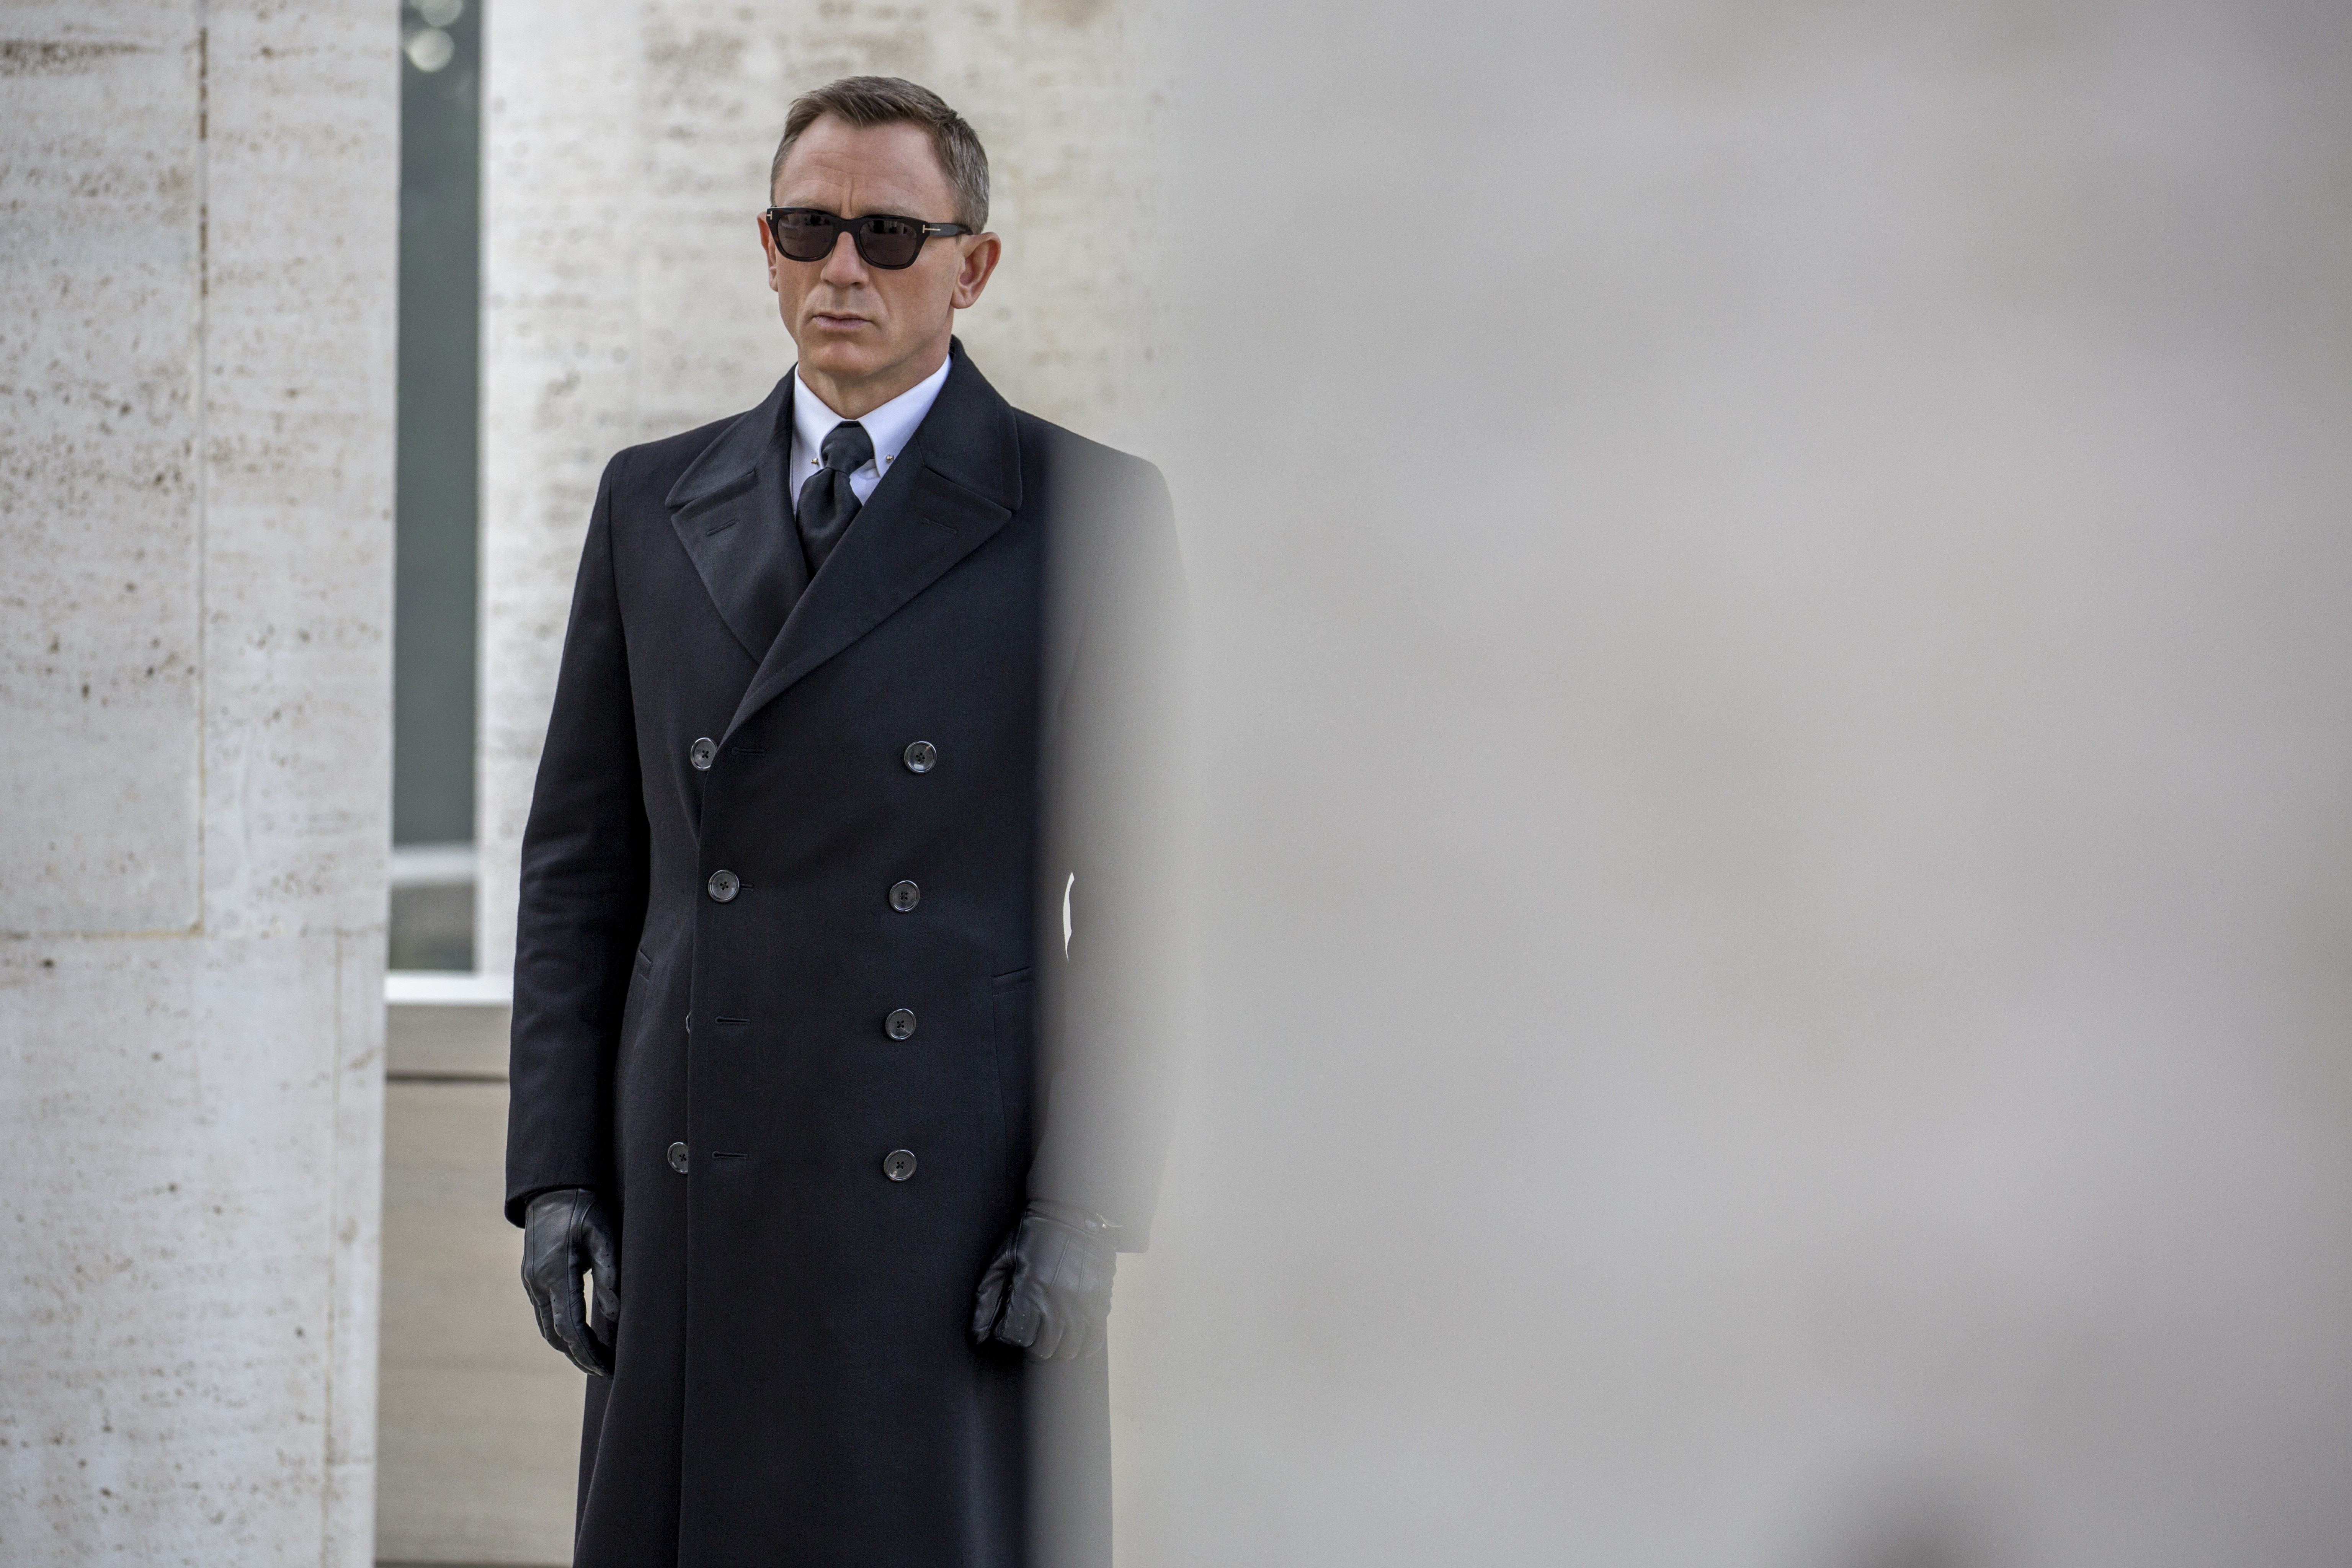 Spectre is a brilliant